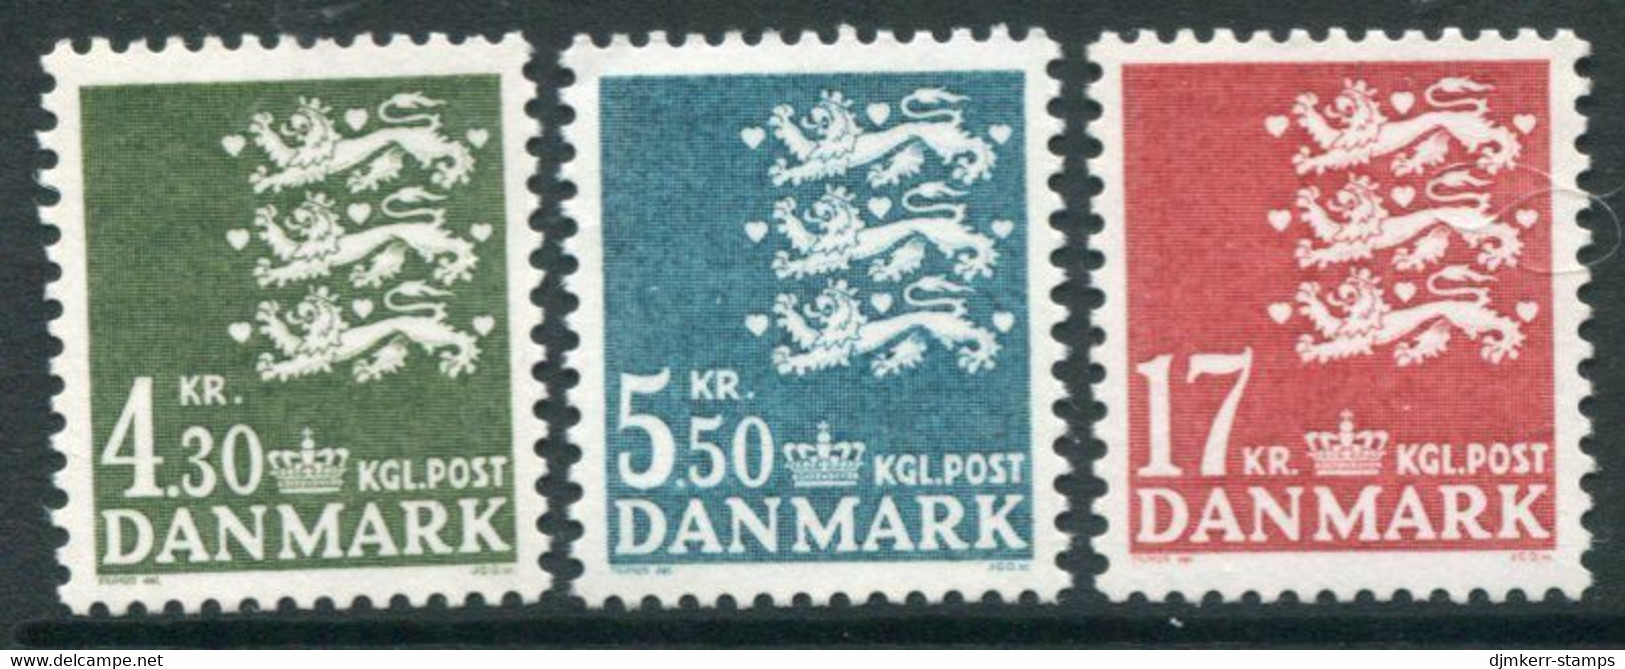 DENMARK 1984 Small Arms Definitive 4.30, 5.50, 17 Kr.. MNH / ** Michel 796-98 - Unused Stamps